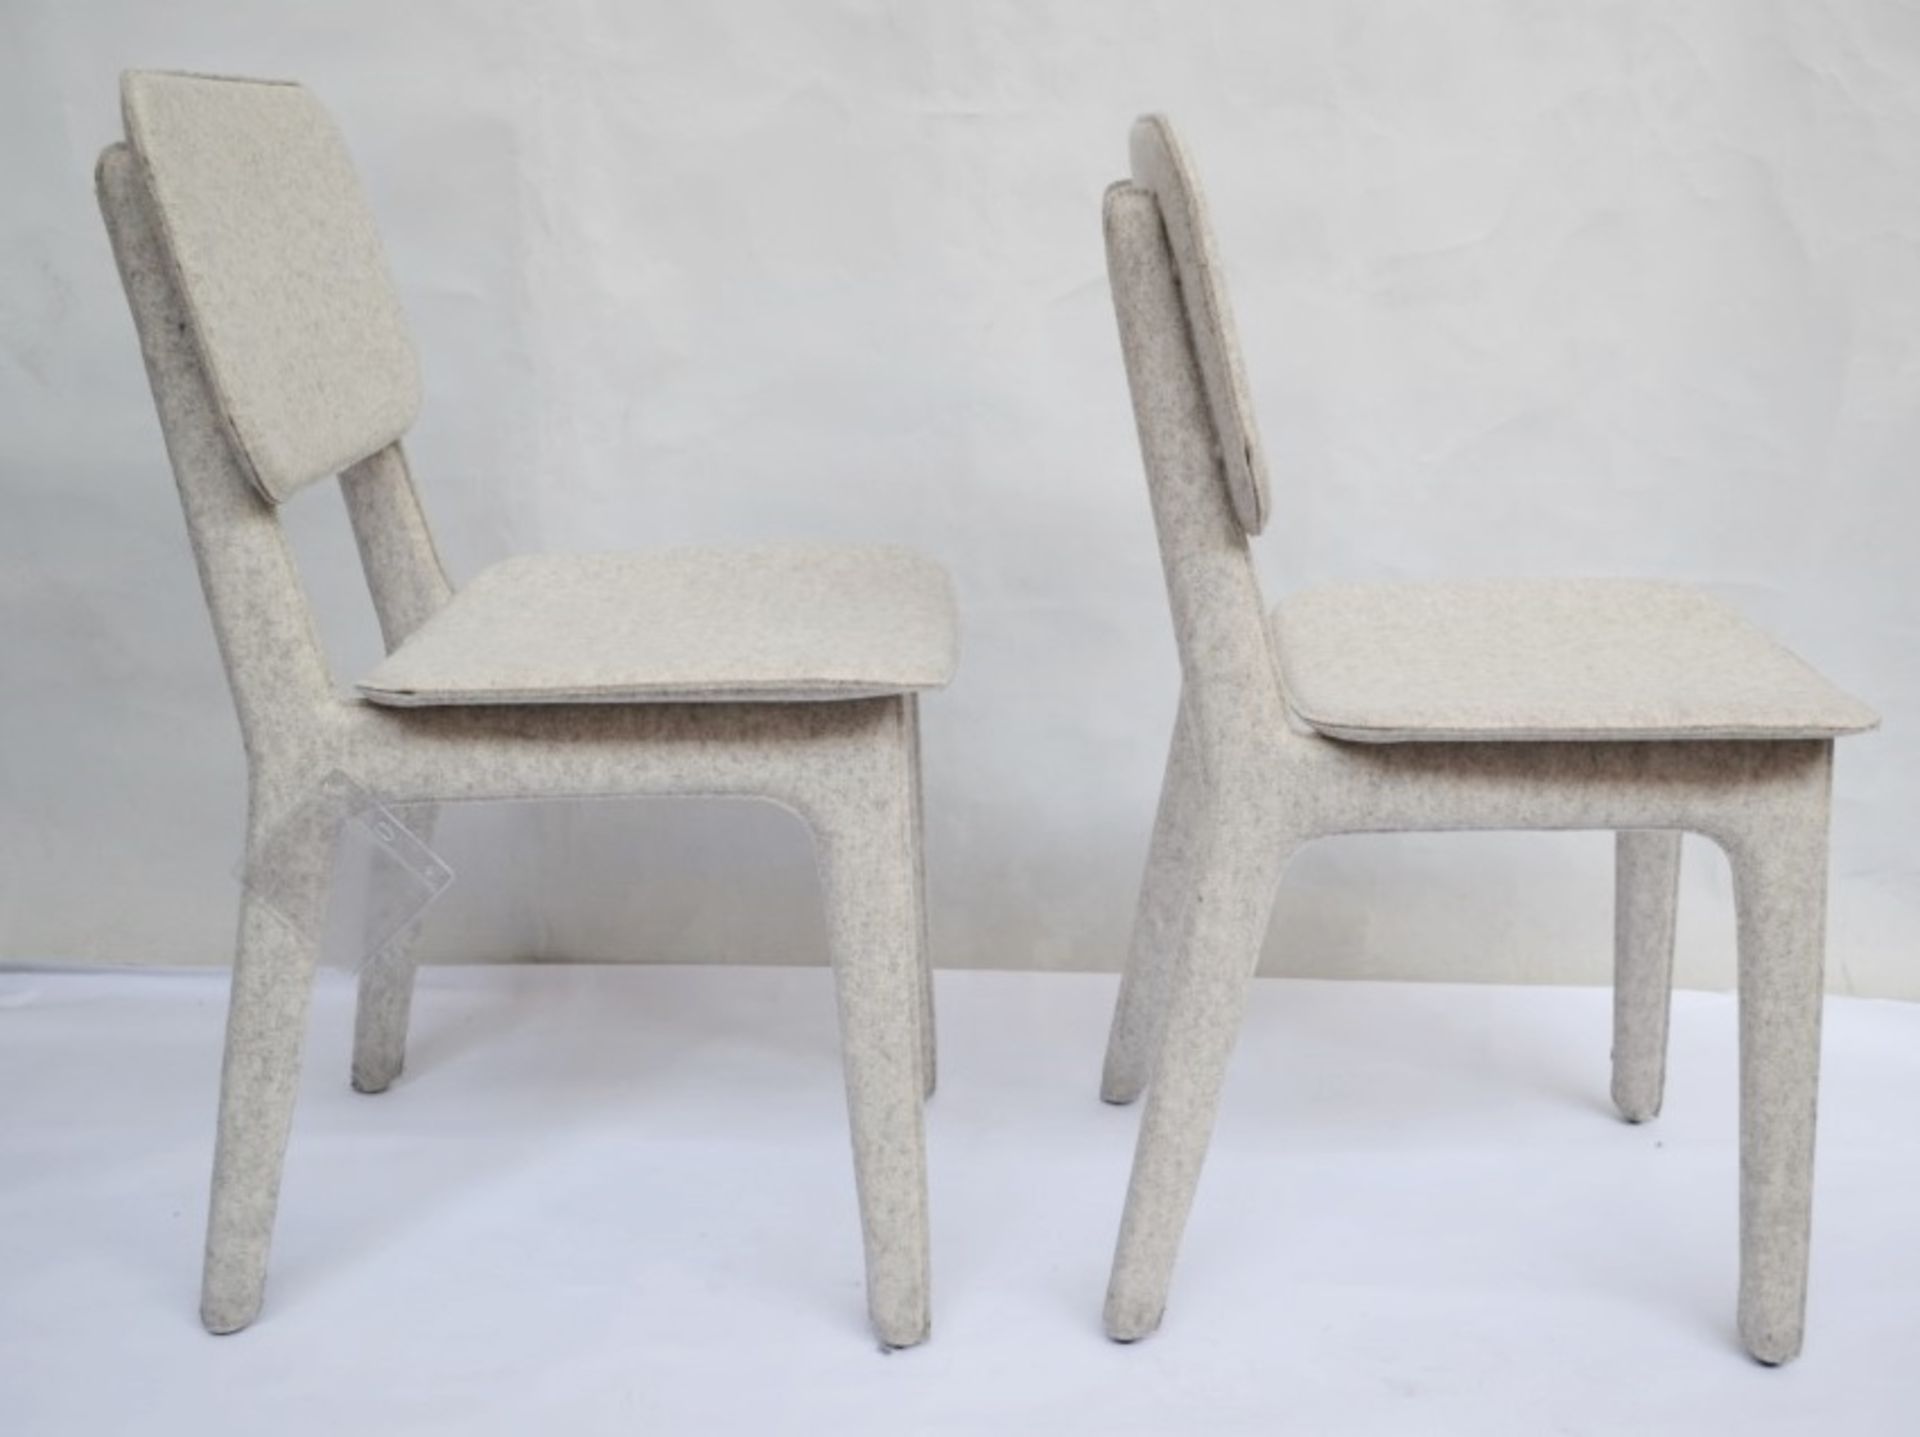 A Pair Of LIGNE ROSET Feutre Nacre "FELT" Dining Chairs In Cream/Grey - Dimensions: H87 x 46 x 46cm, - Image 4 of 8